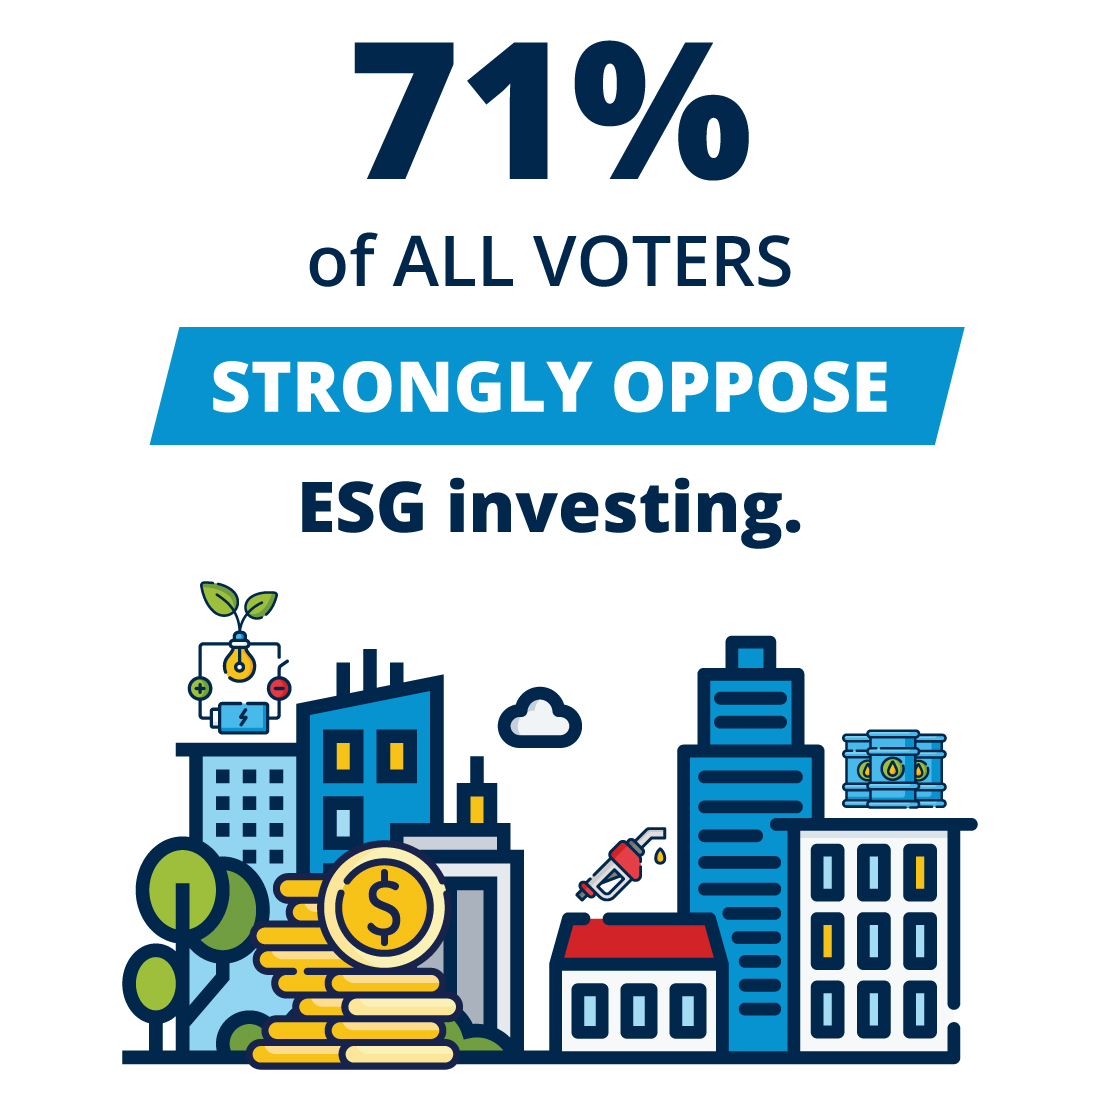 70% of voters strongly oppose ESG investing.